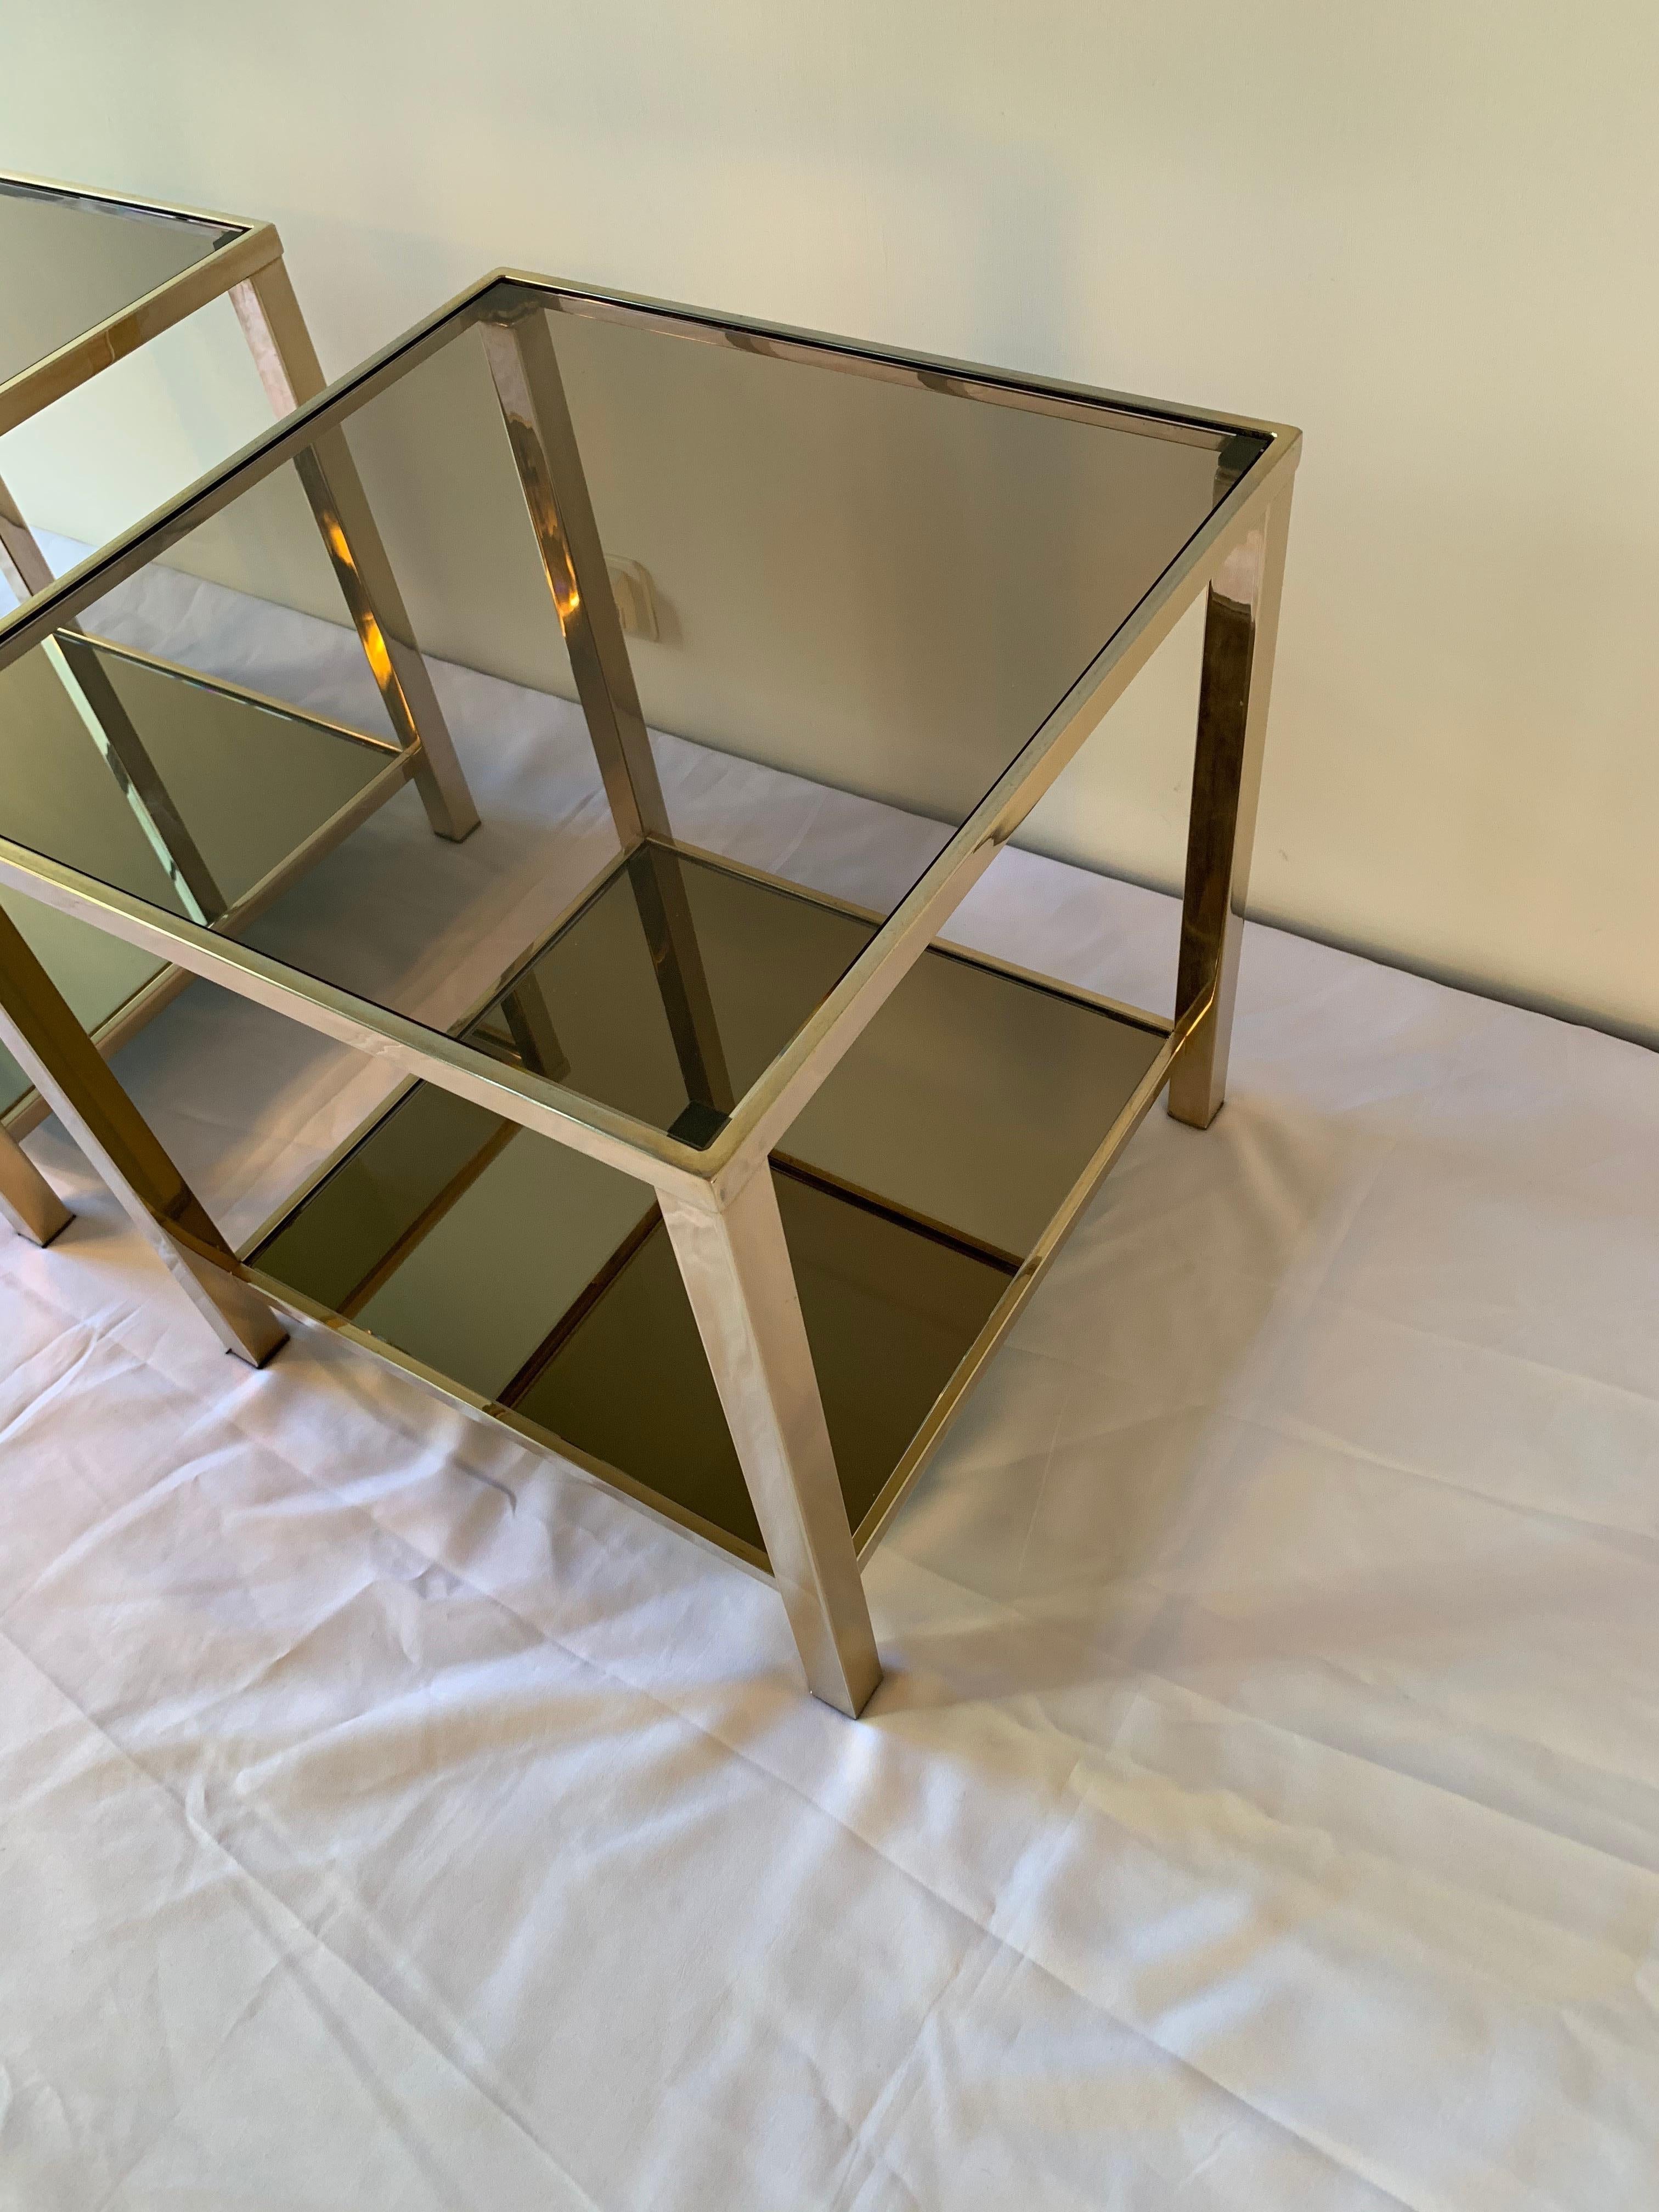 23-Karat Gold-Plated Pair of Side Tables by Belgo Chrome For Sale 2